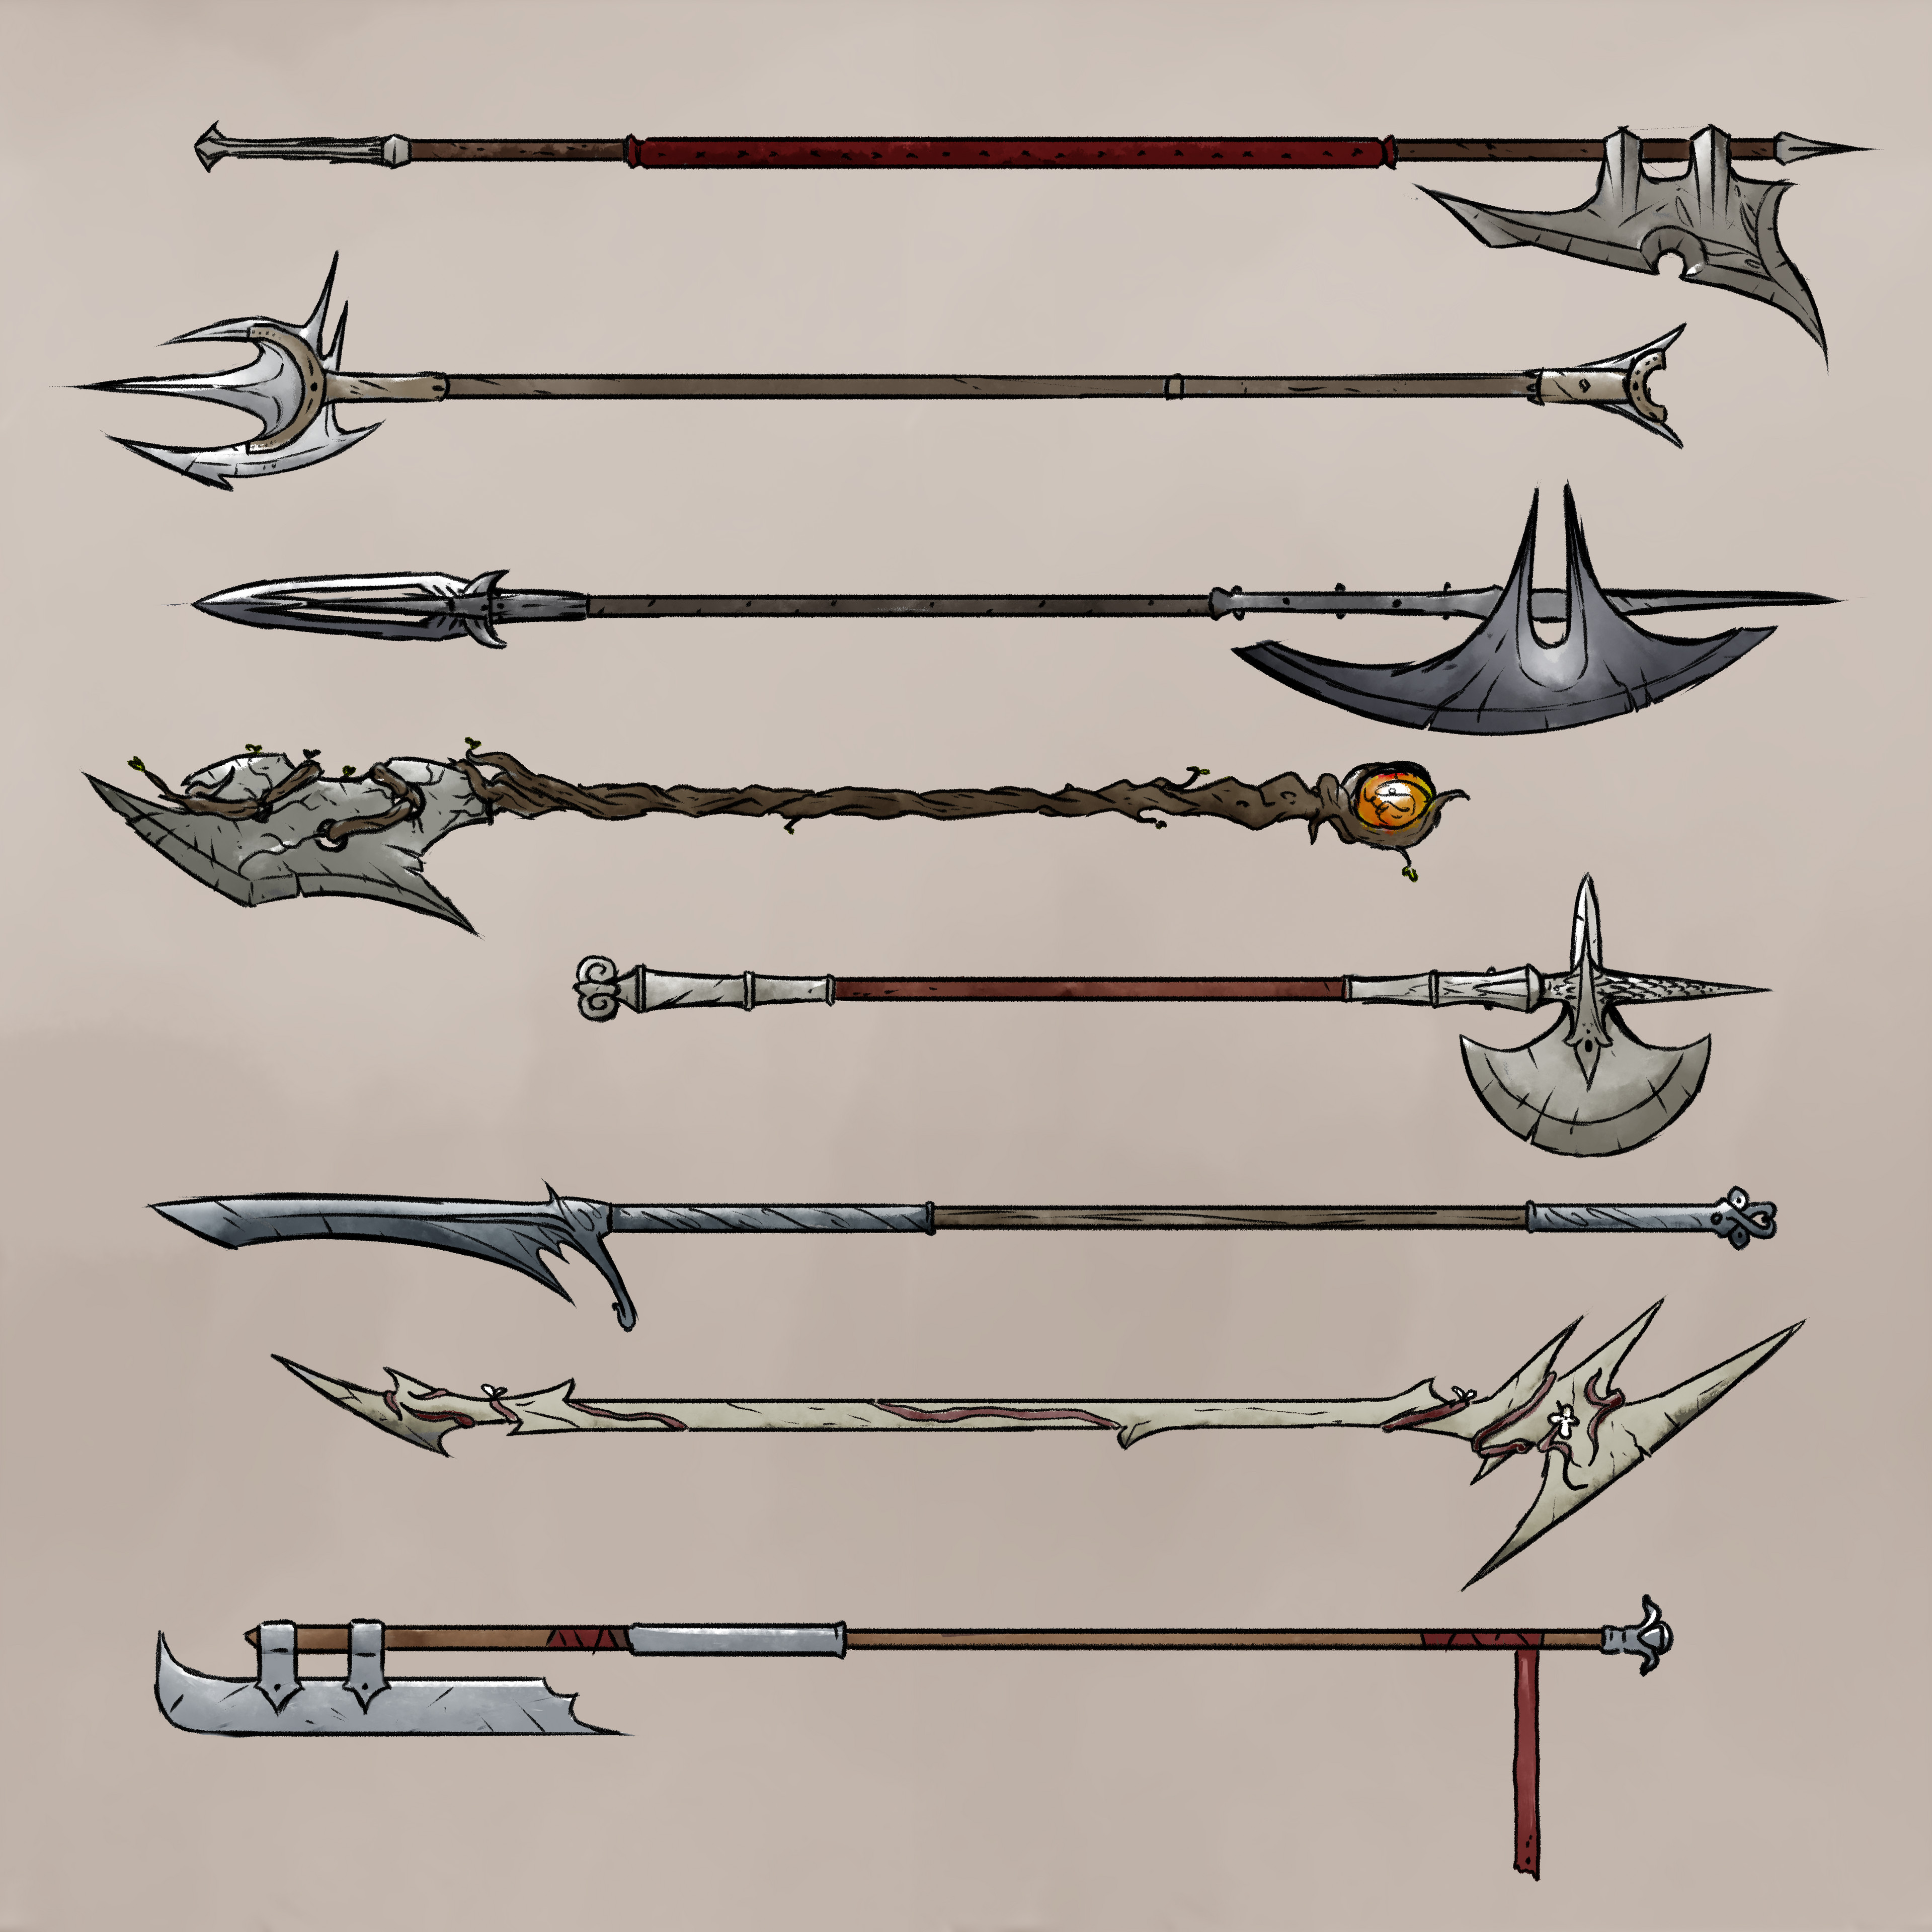 Early Warden Spear Concepts